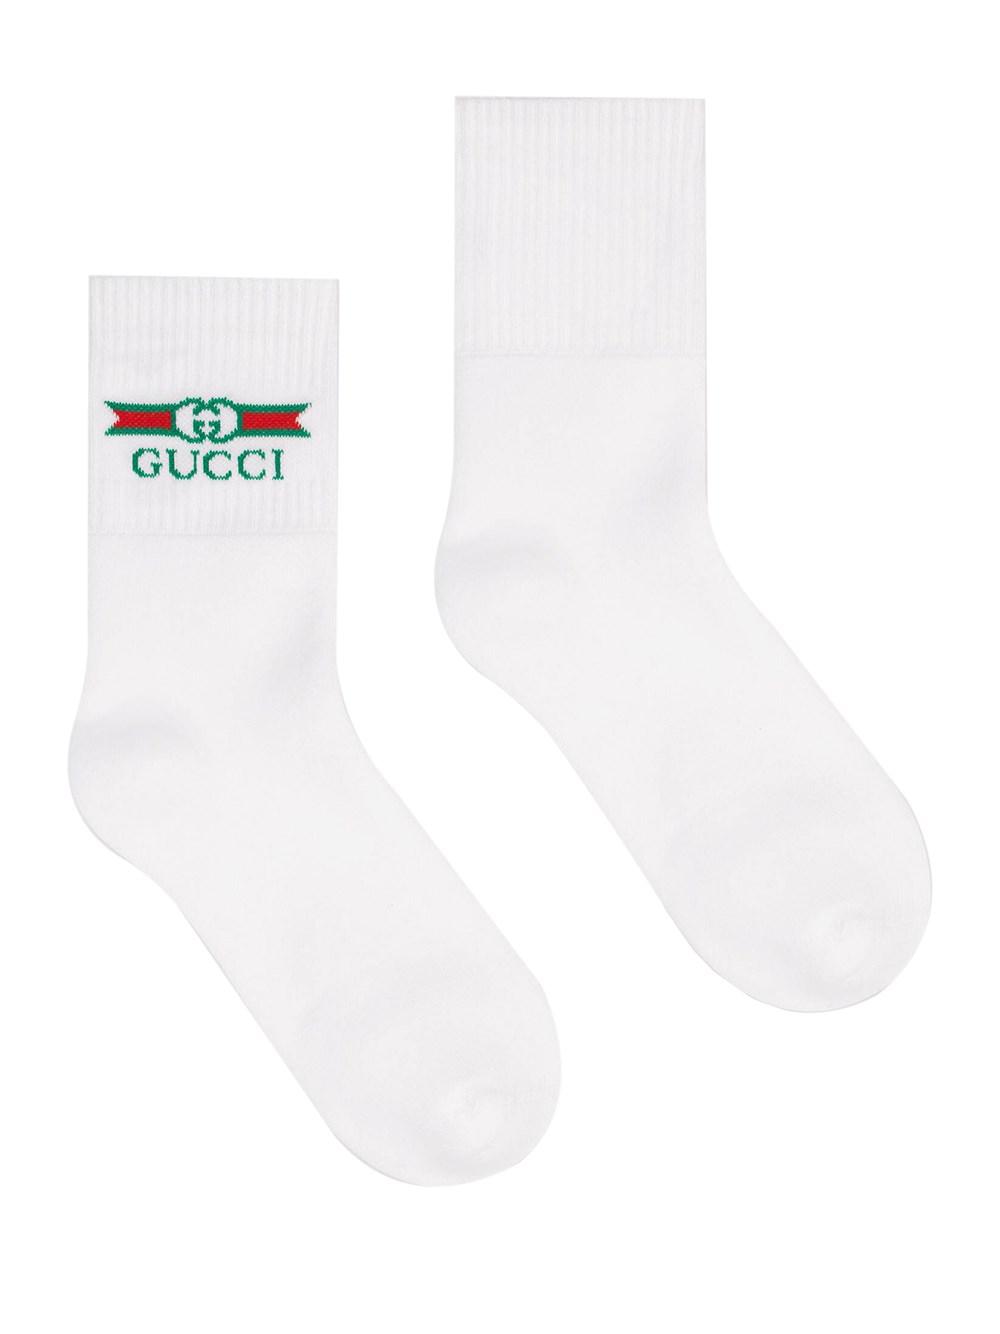 Gucci Cotton Fake Logo Sock in White for Men - Lyst